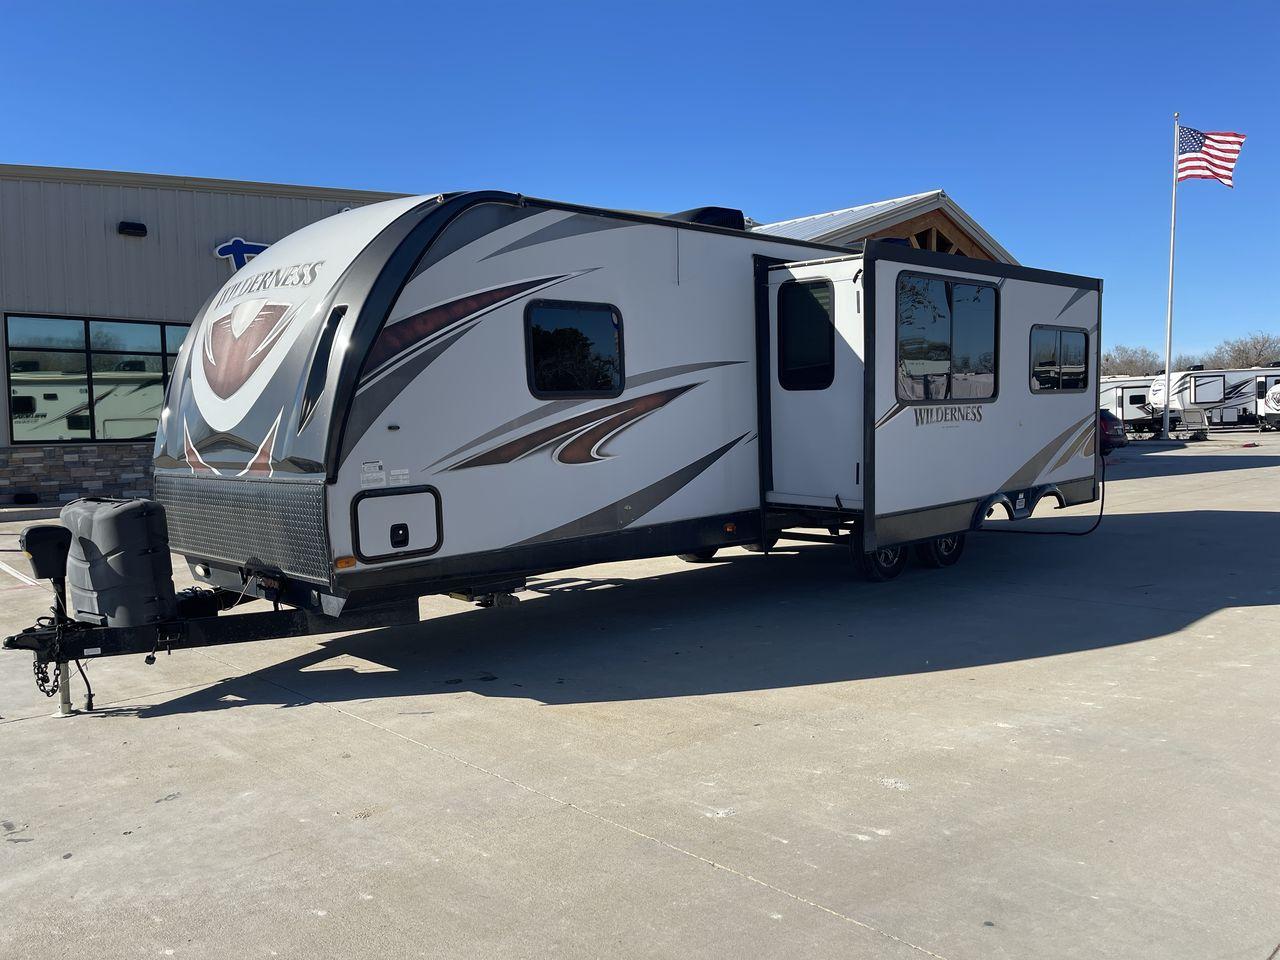 2018 GRAY HEARTLAND WILDERNESS USED 3125 (5SFNB3526JE) , Length: 35.75 ft. | Dry Weight: 6,840 lbs. | Gross Weight: 8,600 lbs. | Slides: 1 transmission, located at 4319 N Main St, Cleburne, TX, 76033, (817) 678-5133, 32.385960, -97.391212 - Discover your inner adventurer with the Heartland Wilderness 3125 travel trailer from 2018. This RV offers the ideal balance of roomy living, contemporary conveniences, and tough sturdiness for your outdoor adventures. It is designed for individuals who desire both comfort and exploration. The di - Photo #23